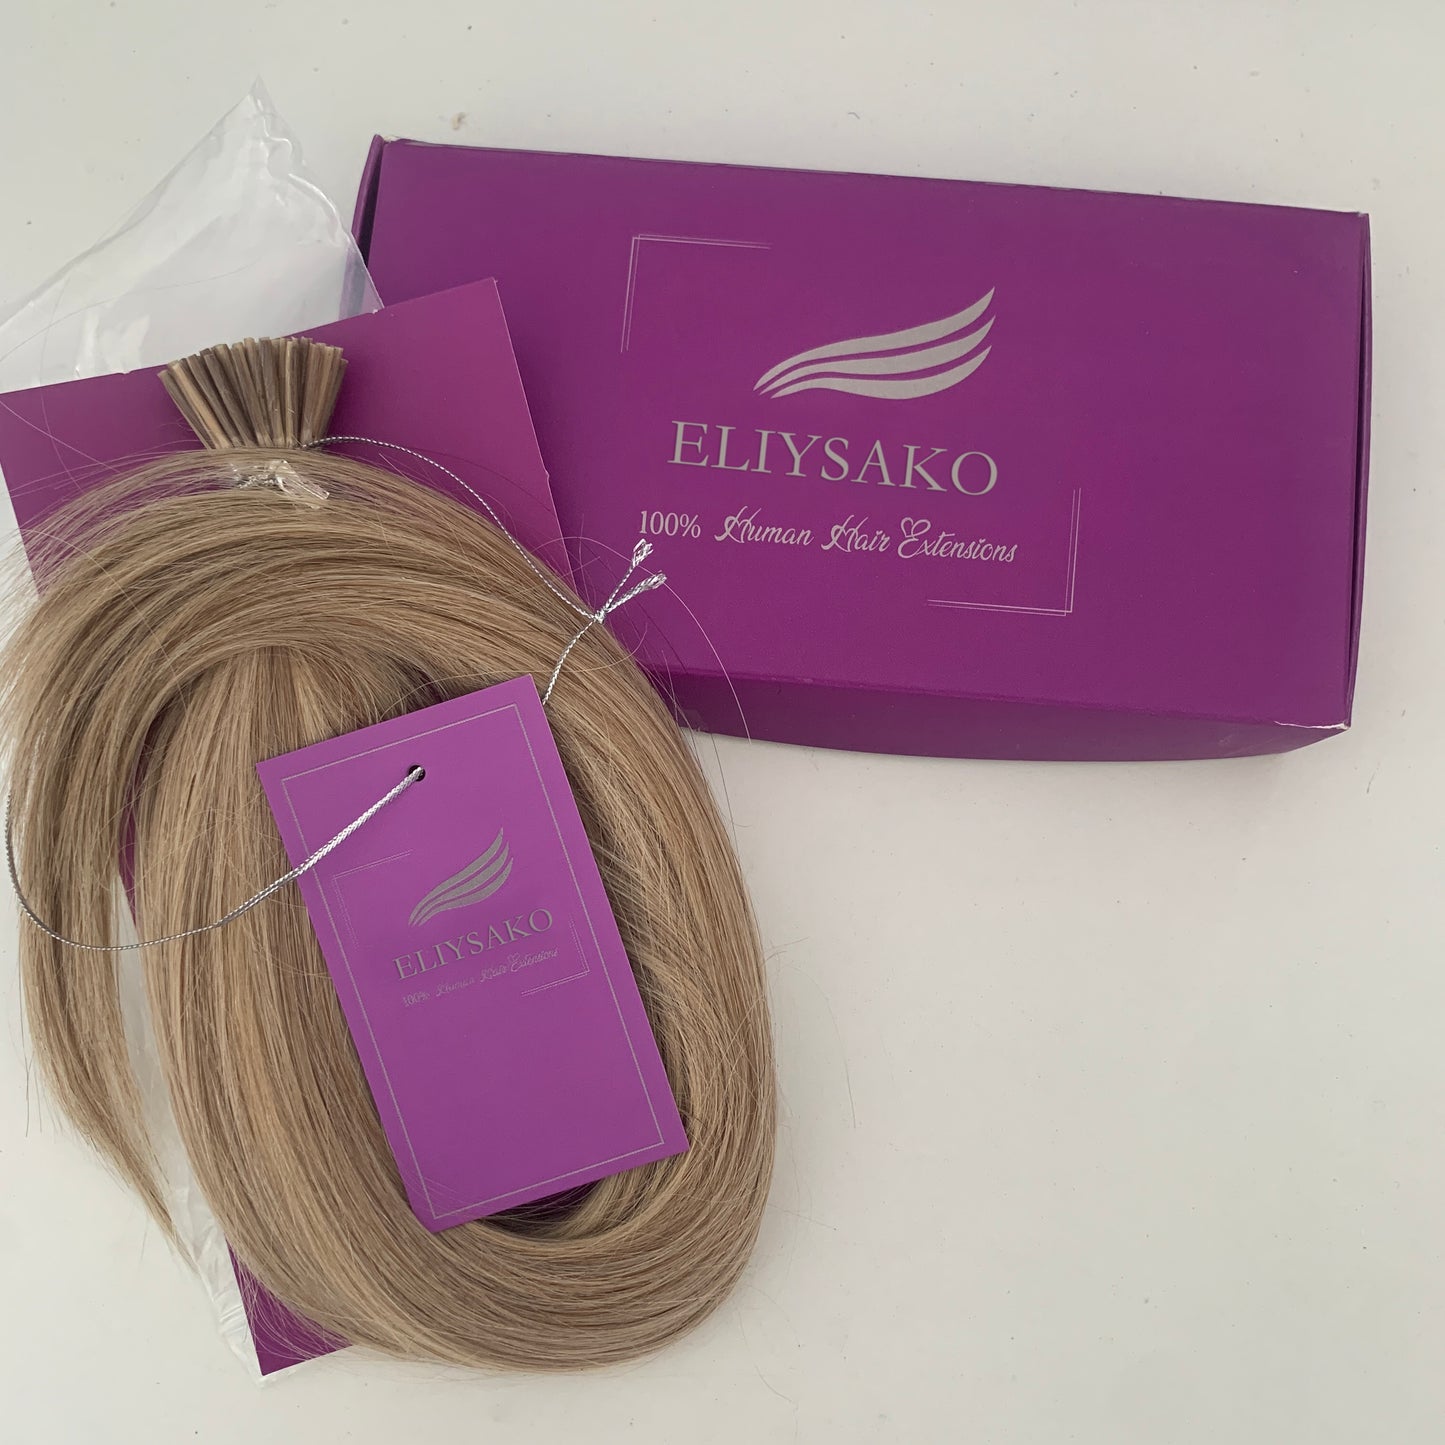 Eliysako I Tip Hair Extensions Human Hair,Cold Fusion Soft Abnormal Hair Extensions 70 Strands Pre Keratin Bonded, Itip Human Hair Extensions,50g/Pack